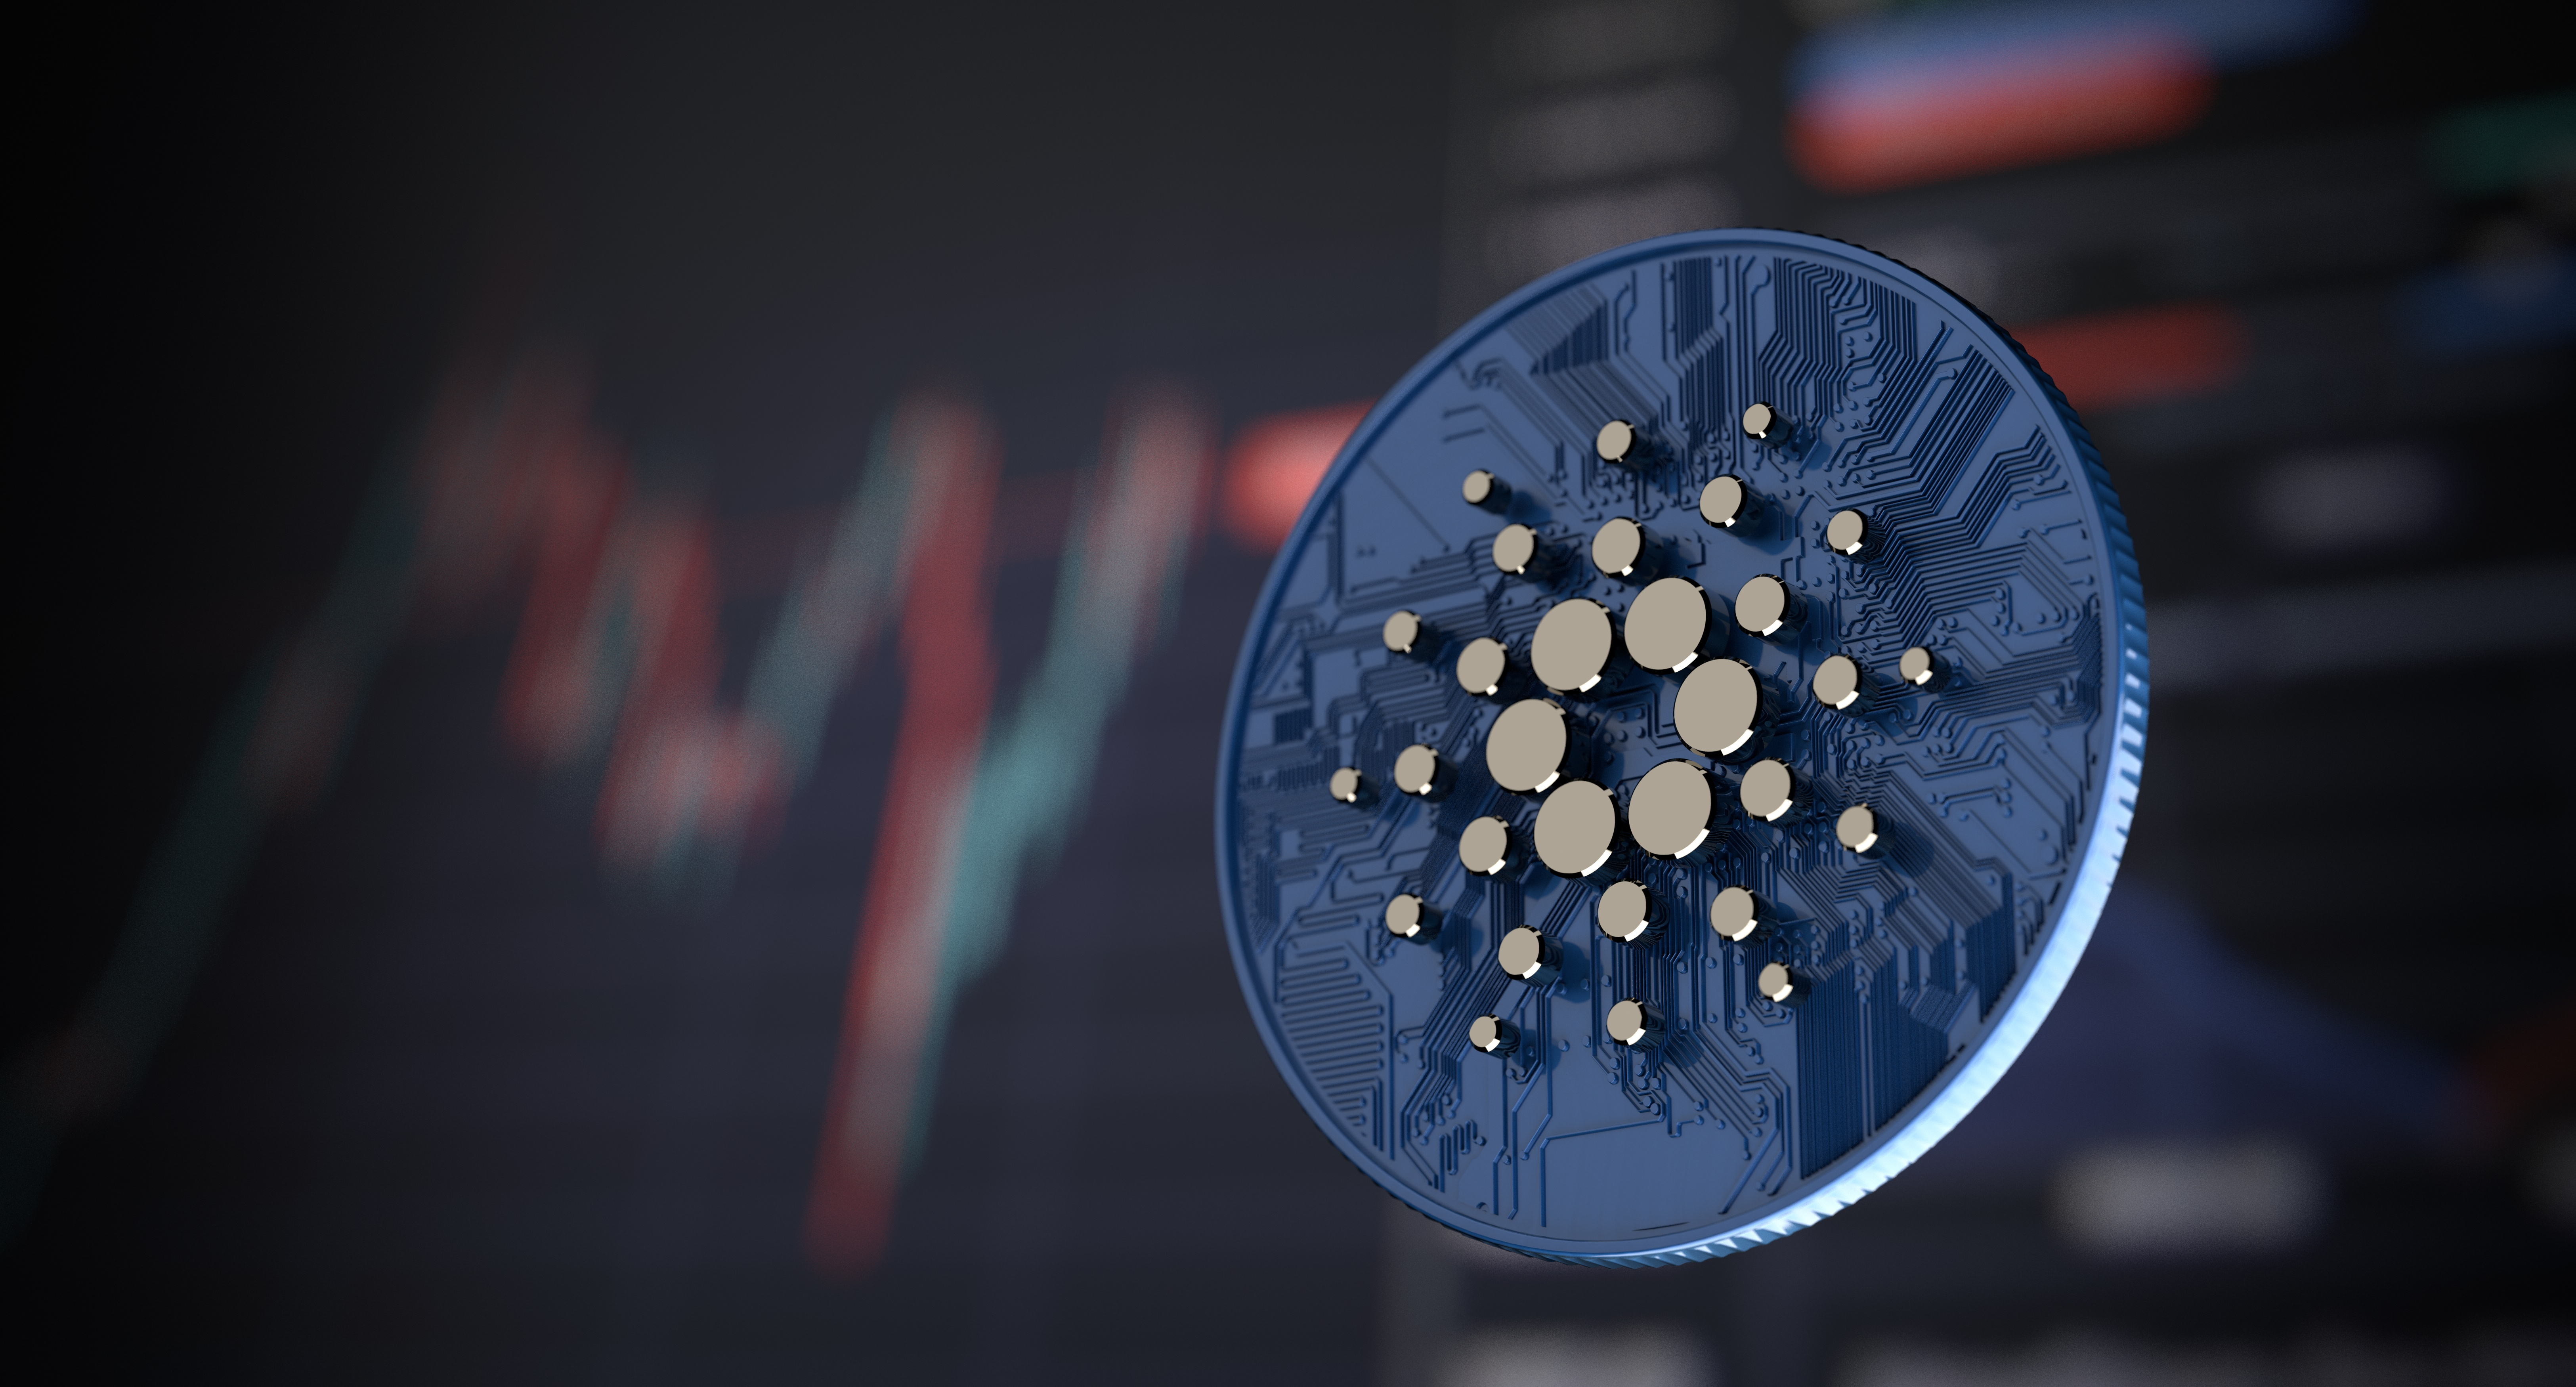 Santiment Points Out Trigger Behind 65% Cardano Rally